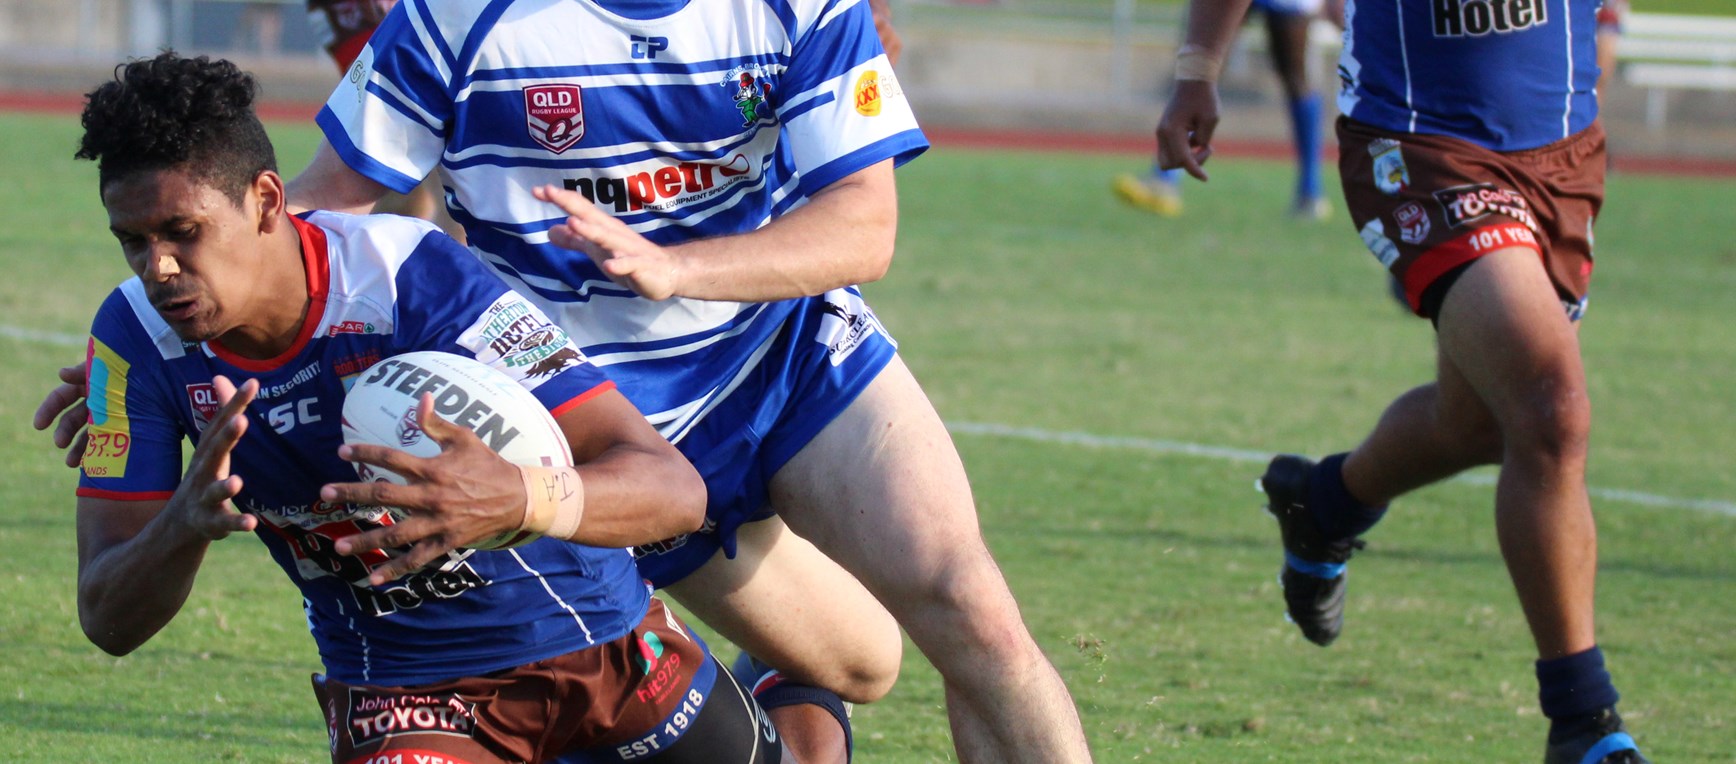 In pictures: Cairns District Rugby League semi finals